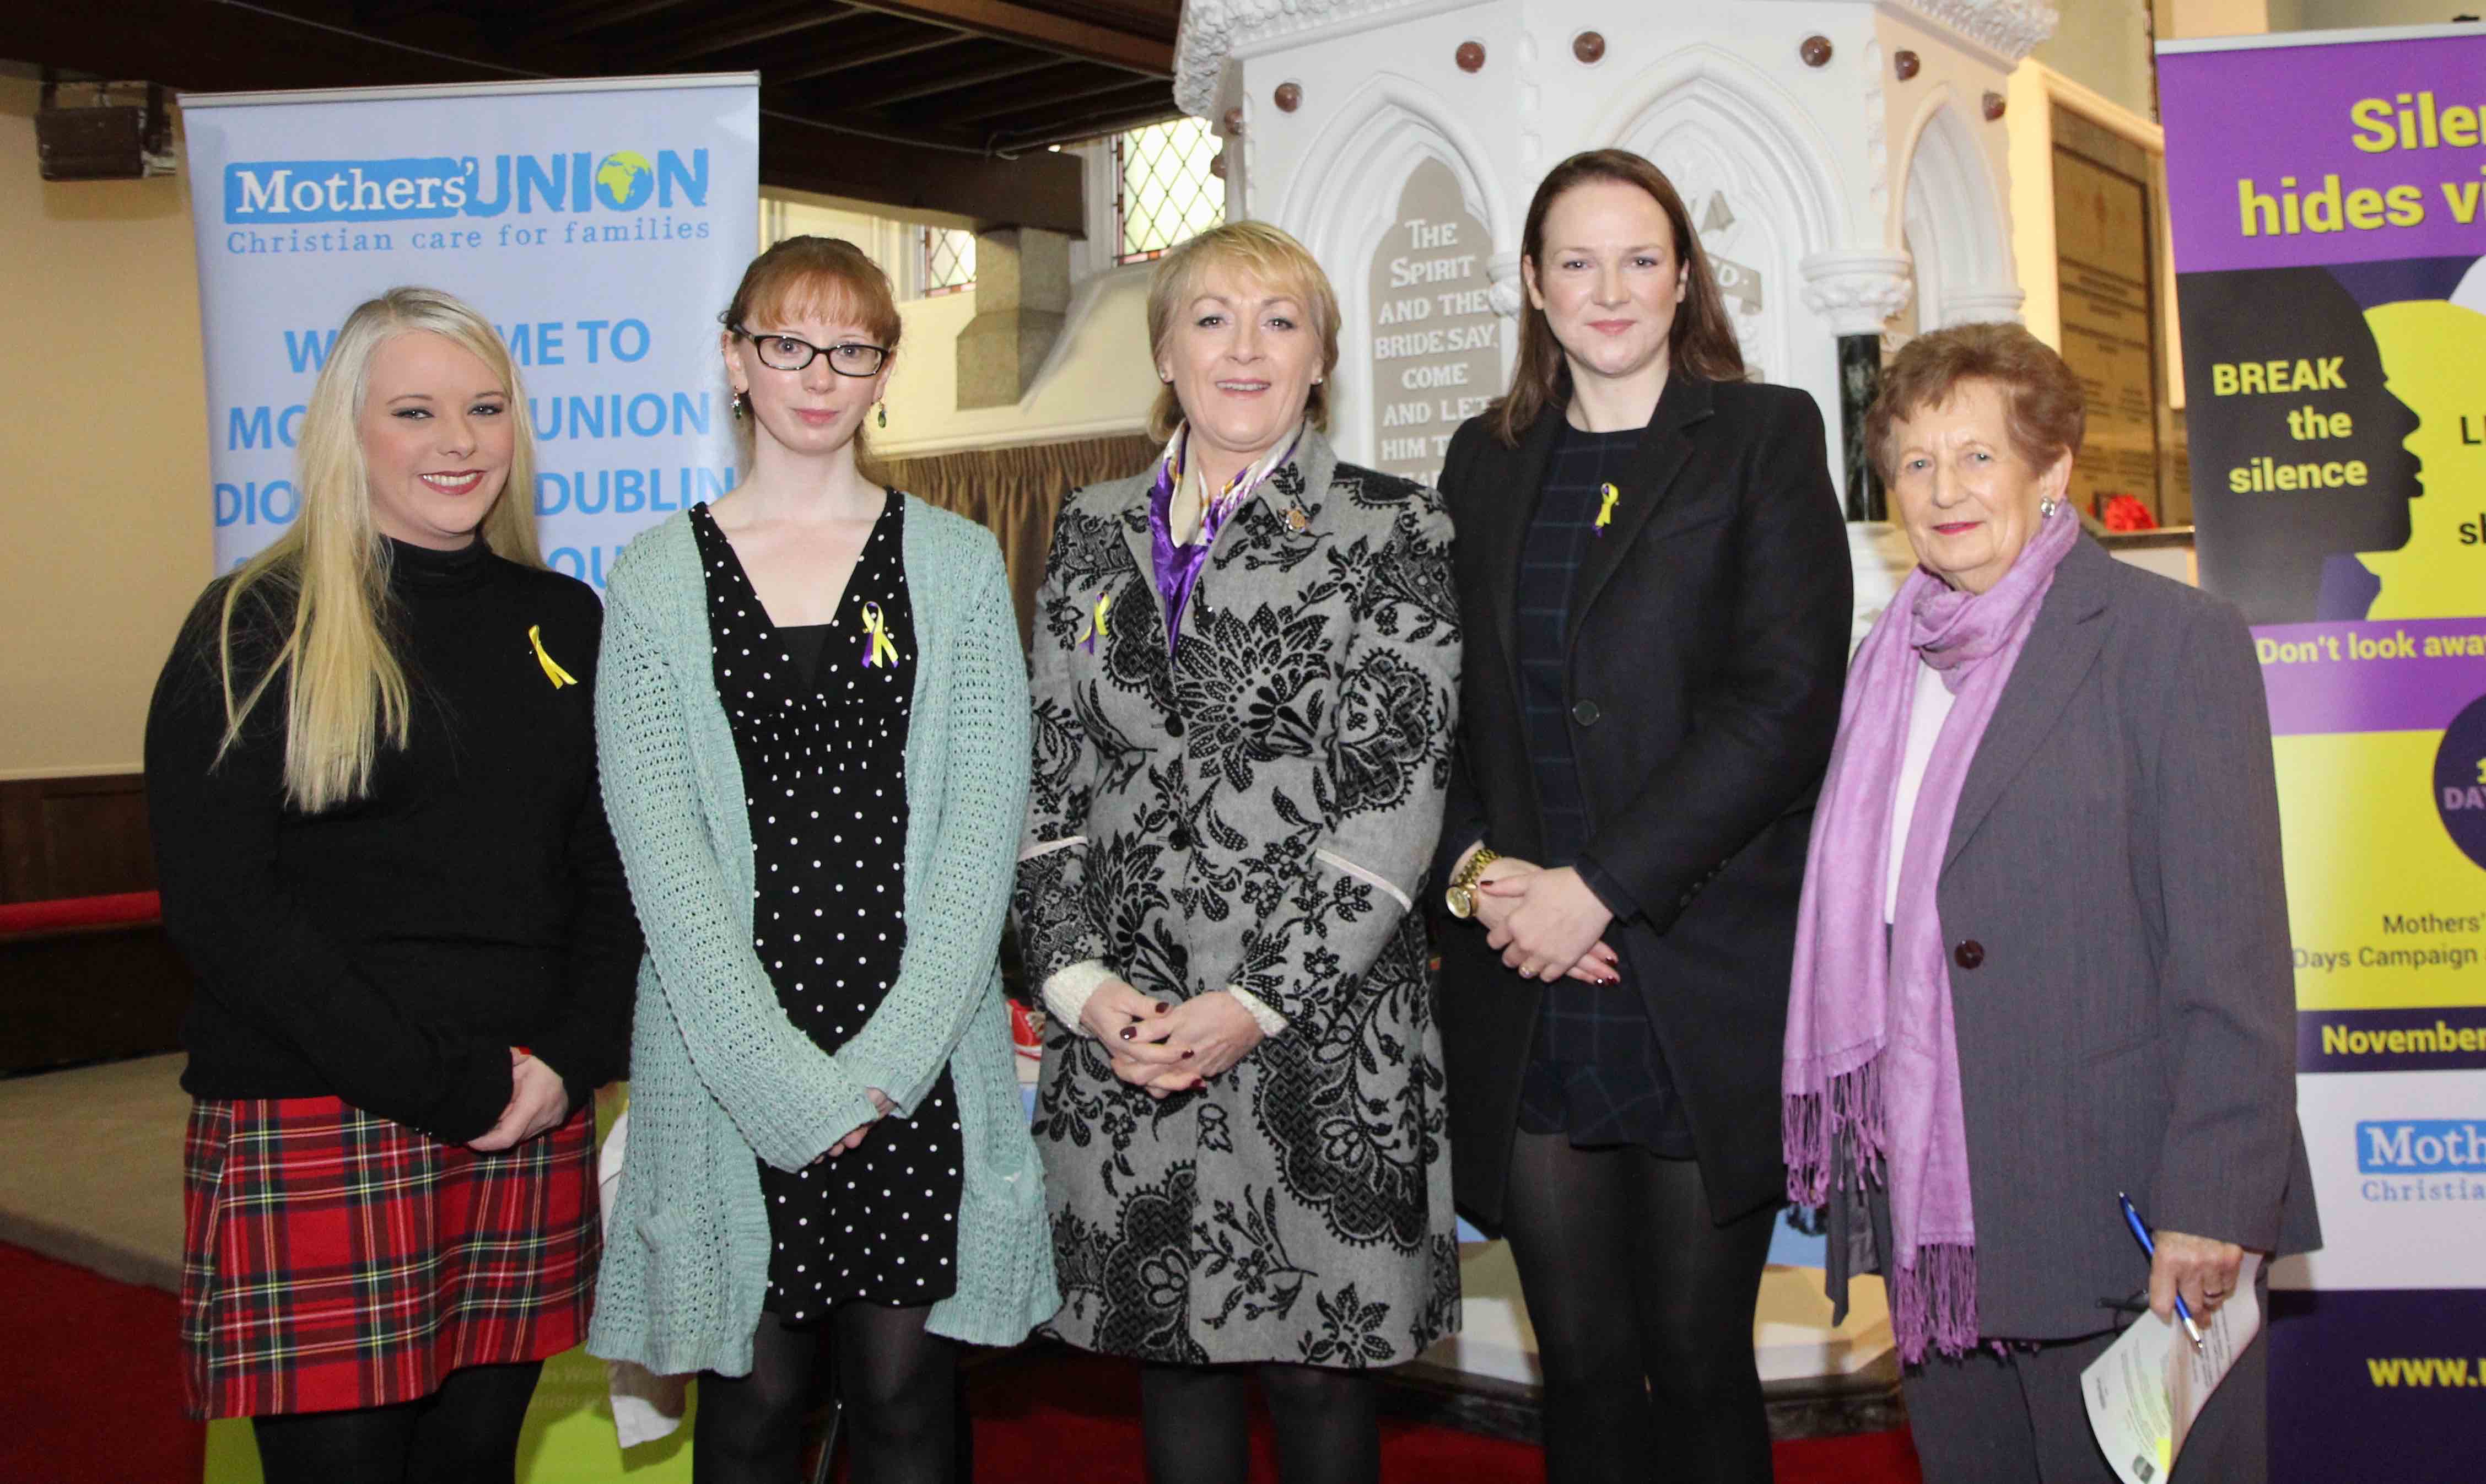 Niamh White of Aoibhneas Women's Refuge, Aoife Palmer of Saoirse Women's Refuge, Karen Nelson (Diocesan President, Mothers' Union), Detective Laura Sweeney of the GNPSB and Avril Gillatt of Mothers' Union at the MU 16 Days' Prayer Vigil.